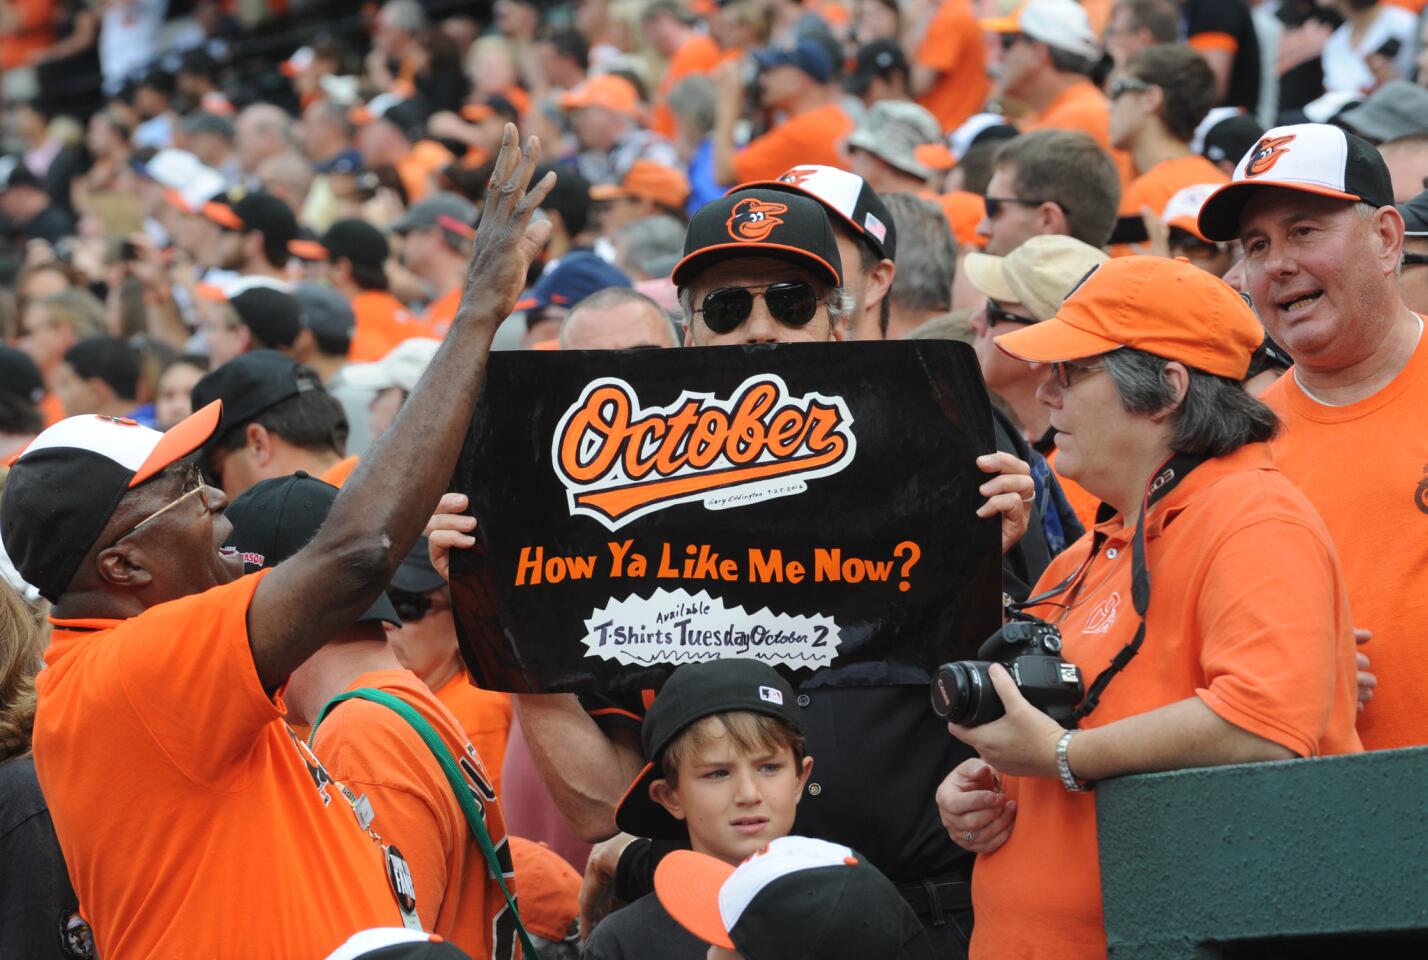 After what has been one of the most surprising, bizarre and improbable baseball seasons, the Baltimore Orioles have clinched a spot in the playoffs for the first time since 1997. And what a ride it's been. Here's a team with plenty of talent, but also its fair share of surprise contributions from unseasoned players and league retreads -- and they've passed the 90-win mark. It was the rebirth of Orioles Magic, in the form of so many wins eked out in one-run ballgames and extra innings. This year has been utterly crazy, and anyone outside of the Orioles clubhouse who says they saw it coming all along is full of it. But in keeping with the feel-good optimism of this playoff berth, we have 12 reasons why the craziness could extend all the way through October. Let's be clear: this is not a guarantee. But to borrow the mantra from the 1989 squad, a team that similarly defied expectations but fell just short of the postseason: Why Not? -- Brandon Weigel